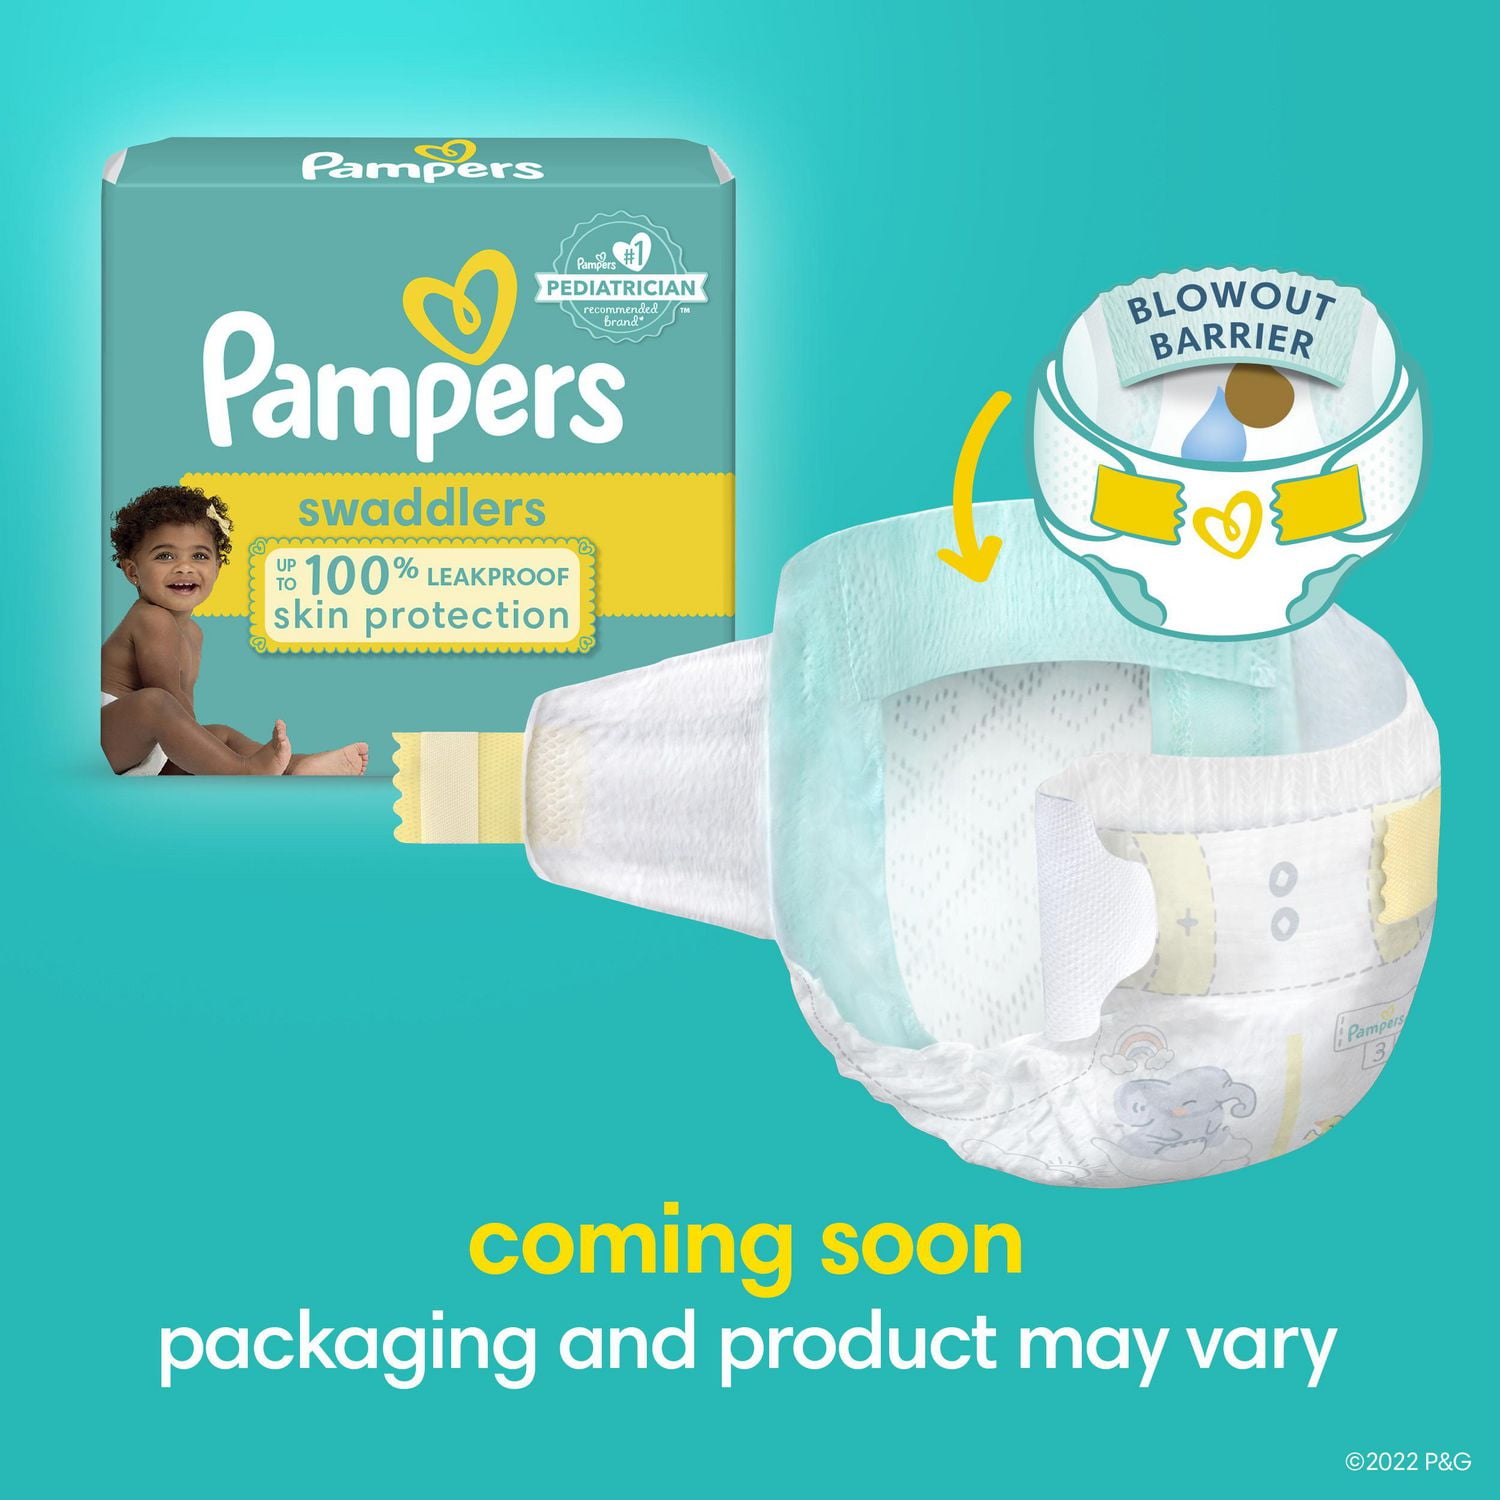 Pampers Swaddlers Diapers - Size 2, One Month Supply (186 Count), Ultra  Soft Disposable Baby Diapers